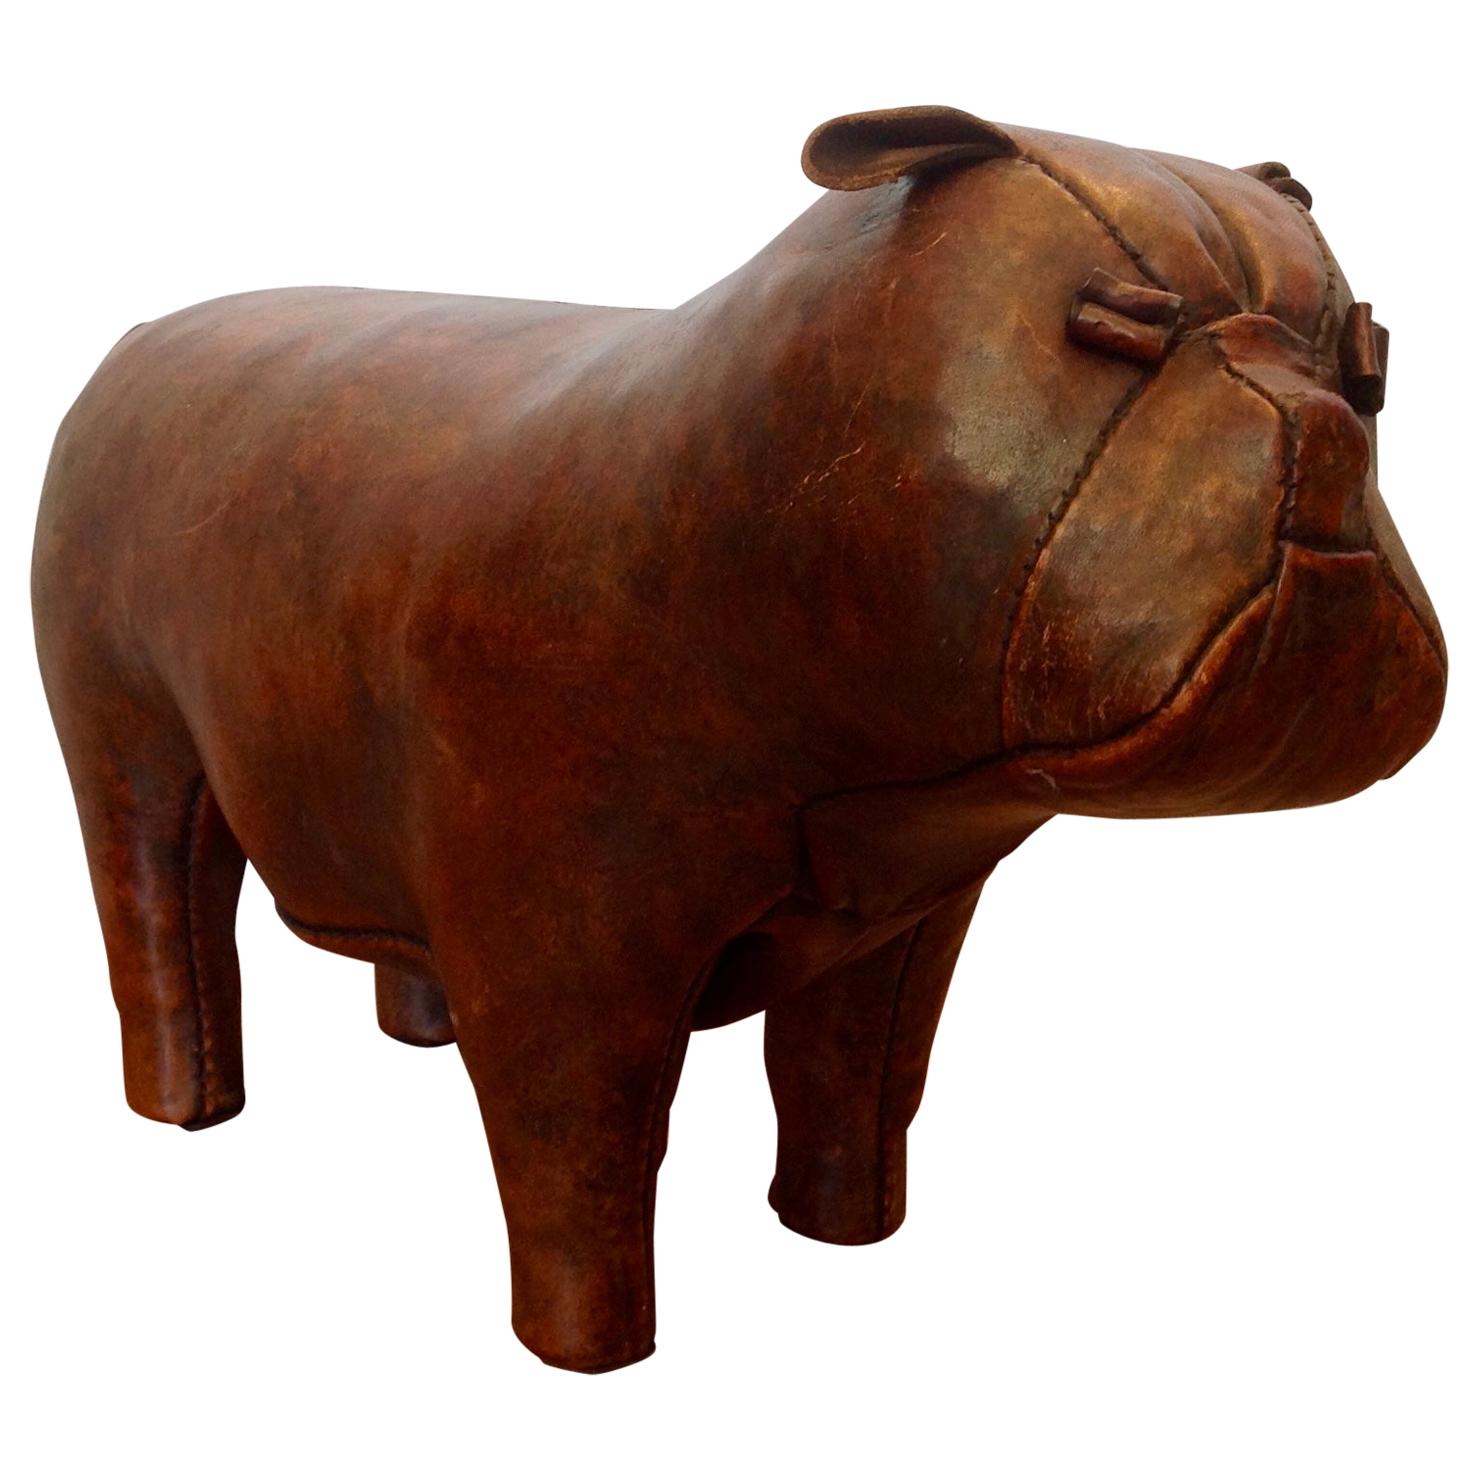 Whimsical Abercrombie's Bulldog Foot Rest by Dimitri Omersa